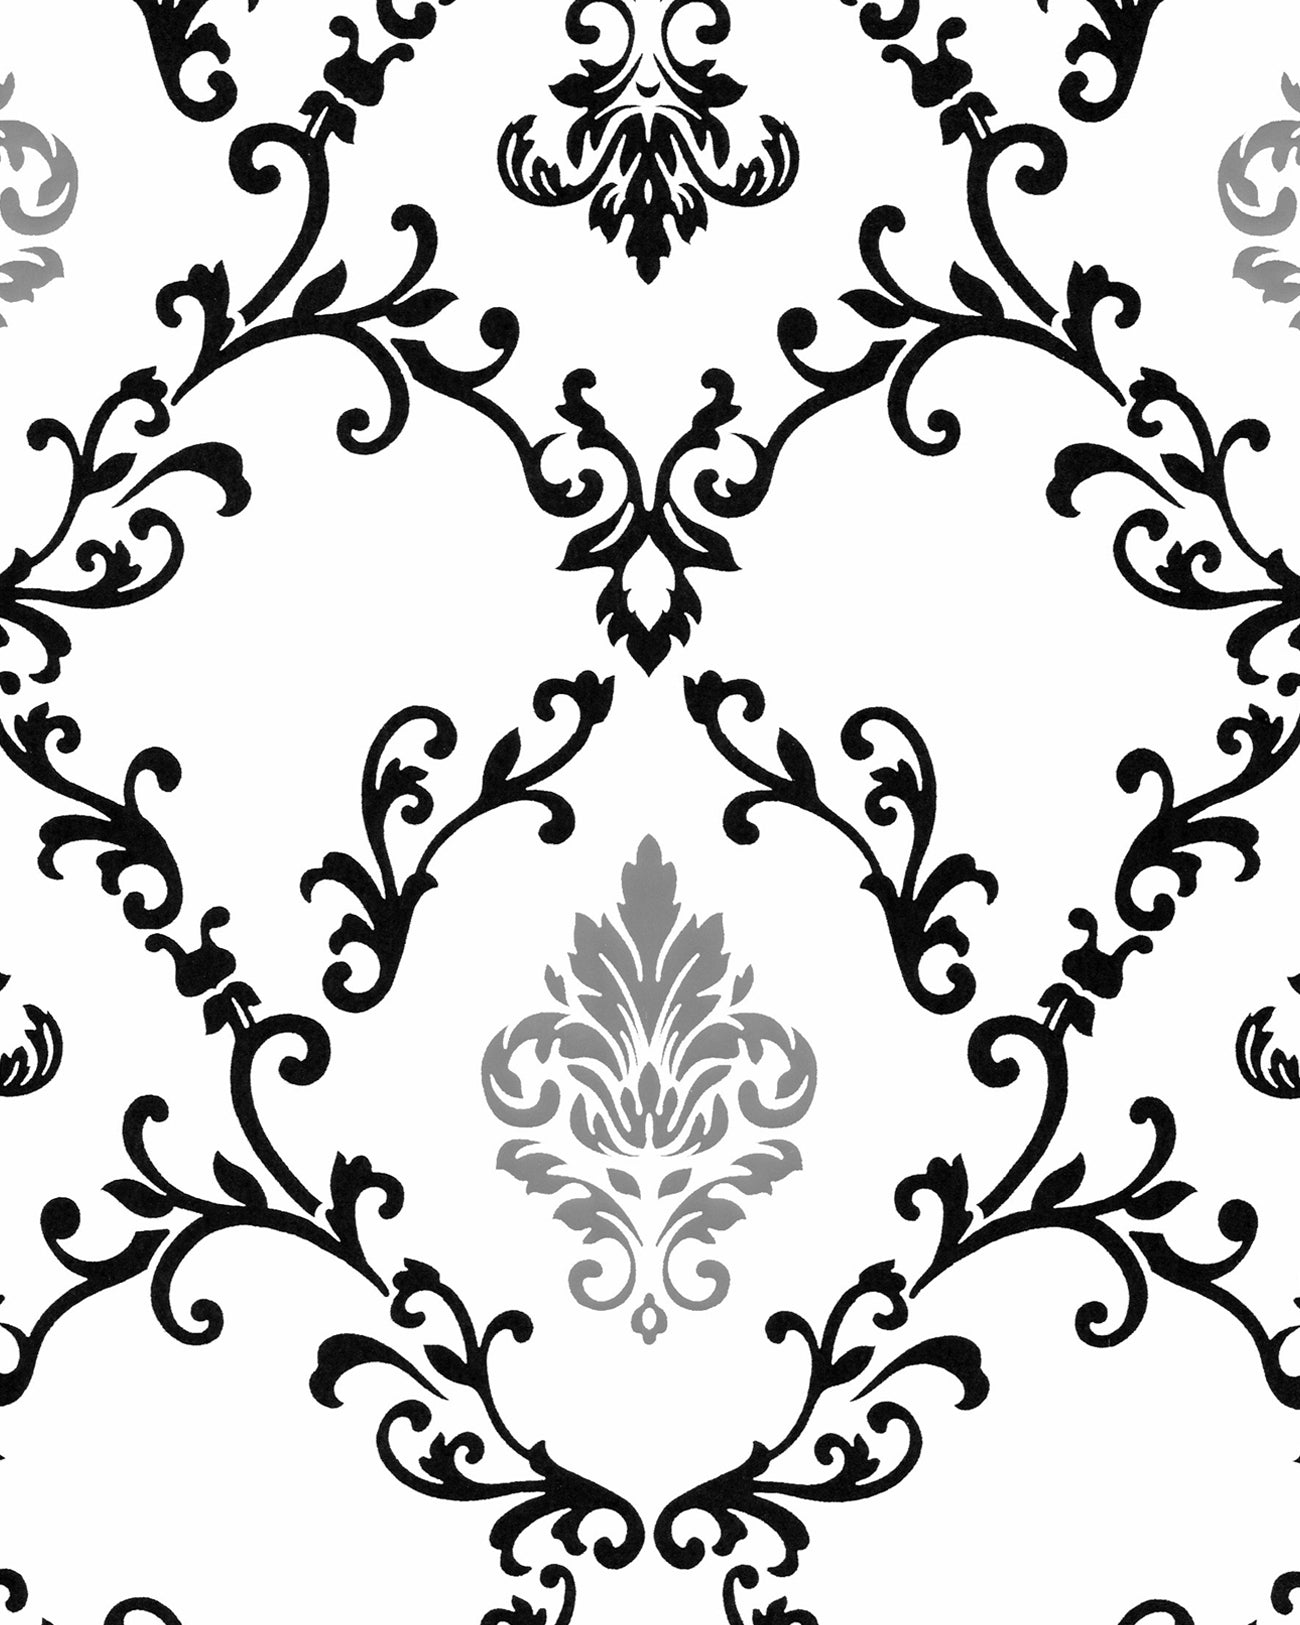 Baroque wallpaper EDEM 85026BR20 smooth vinyl wallpaper with ornaments and metallic accents white black silver 5.33 m2